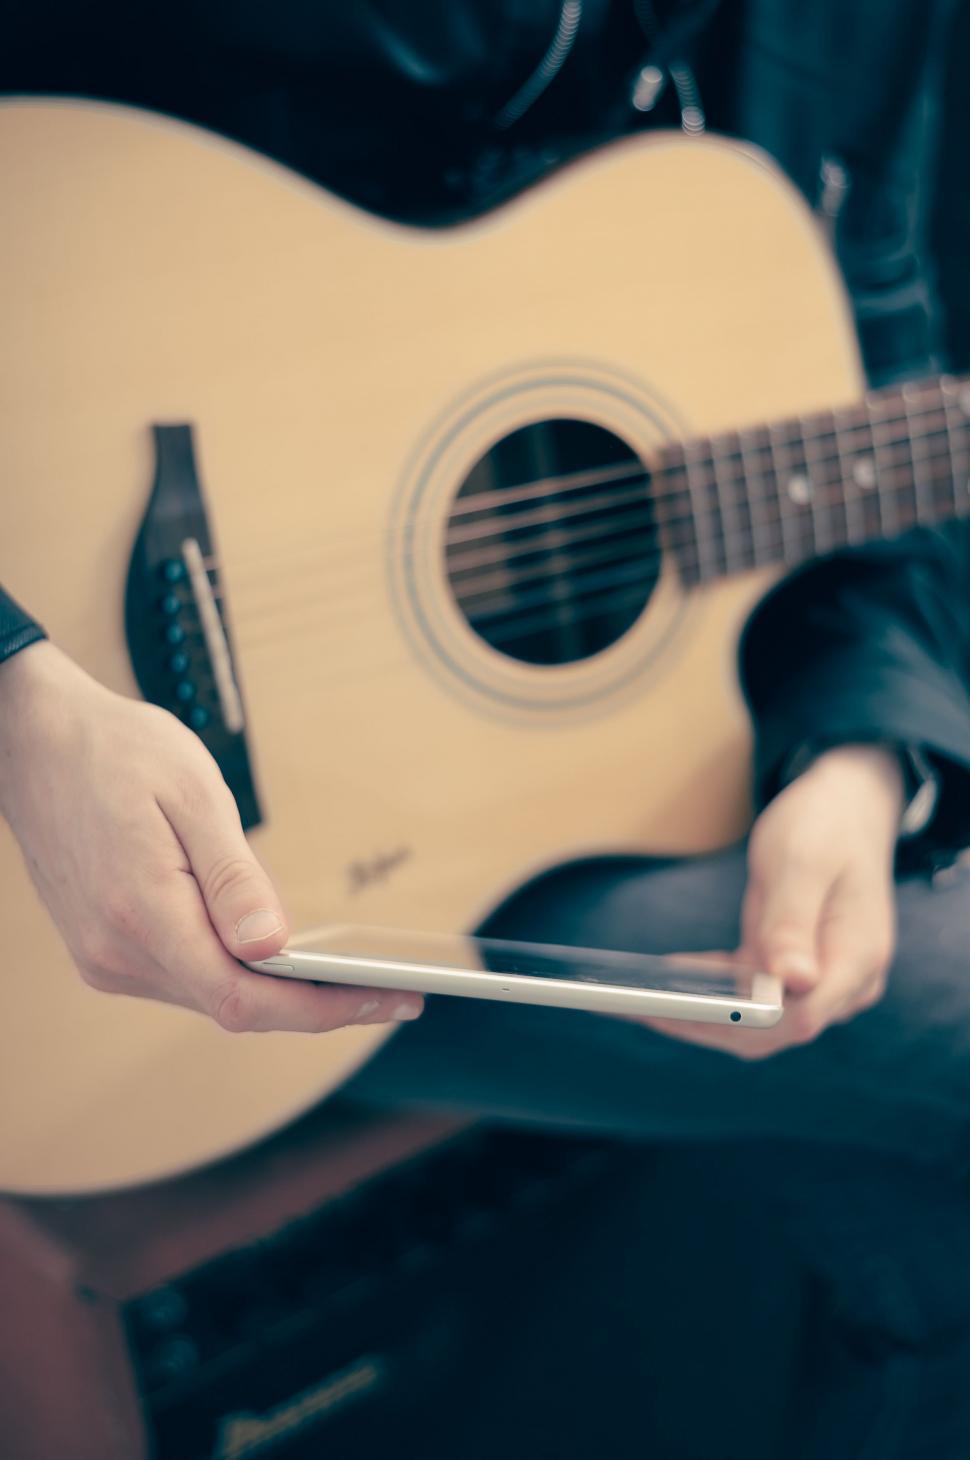 Free Image of Person Holding Cell Phone and Guitar 